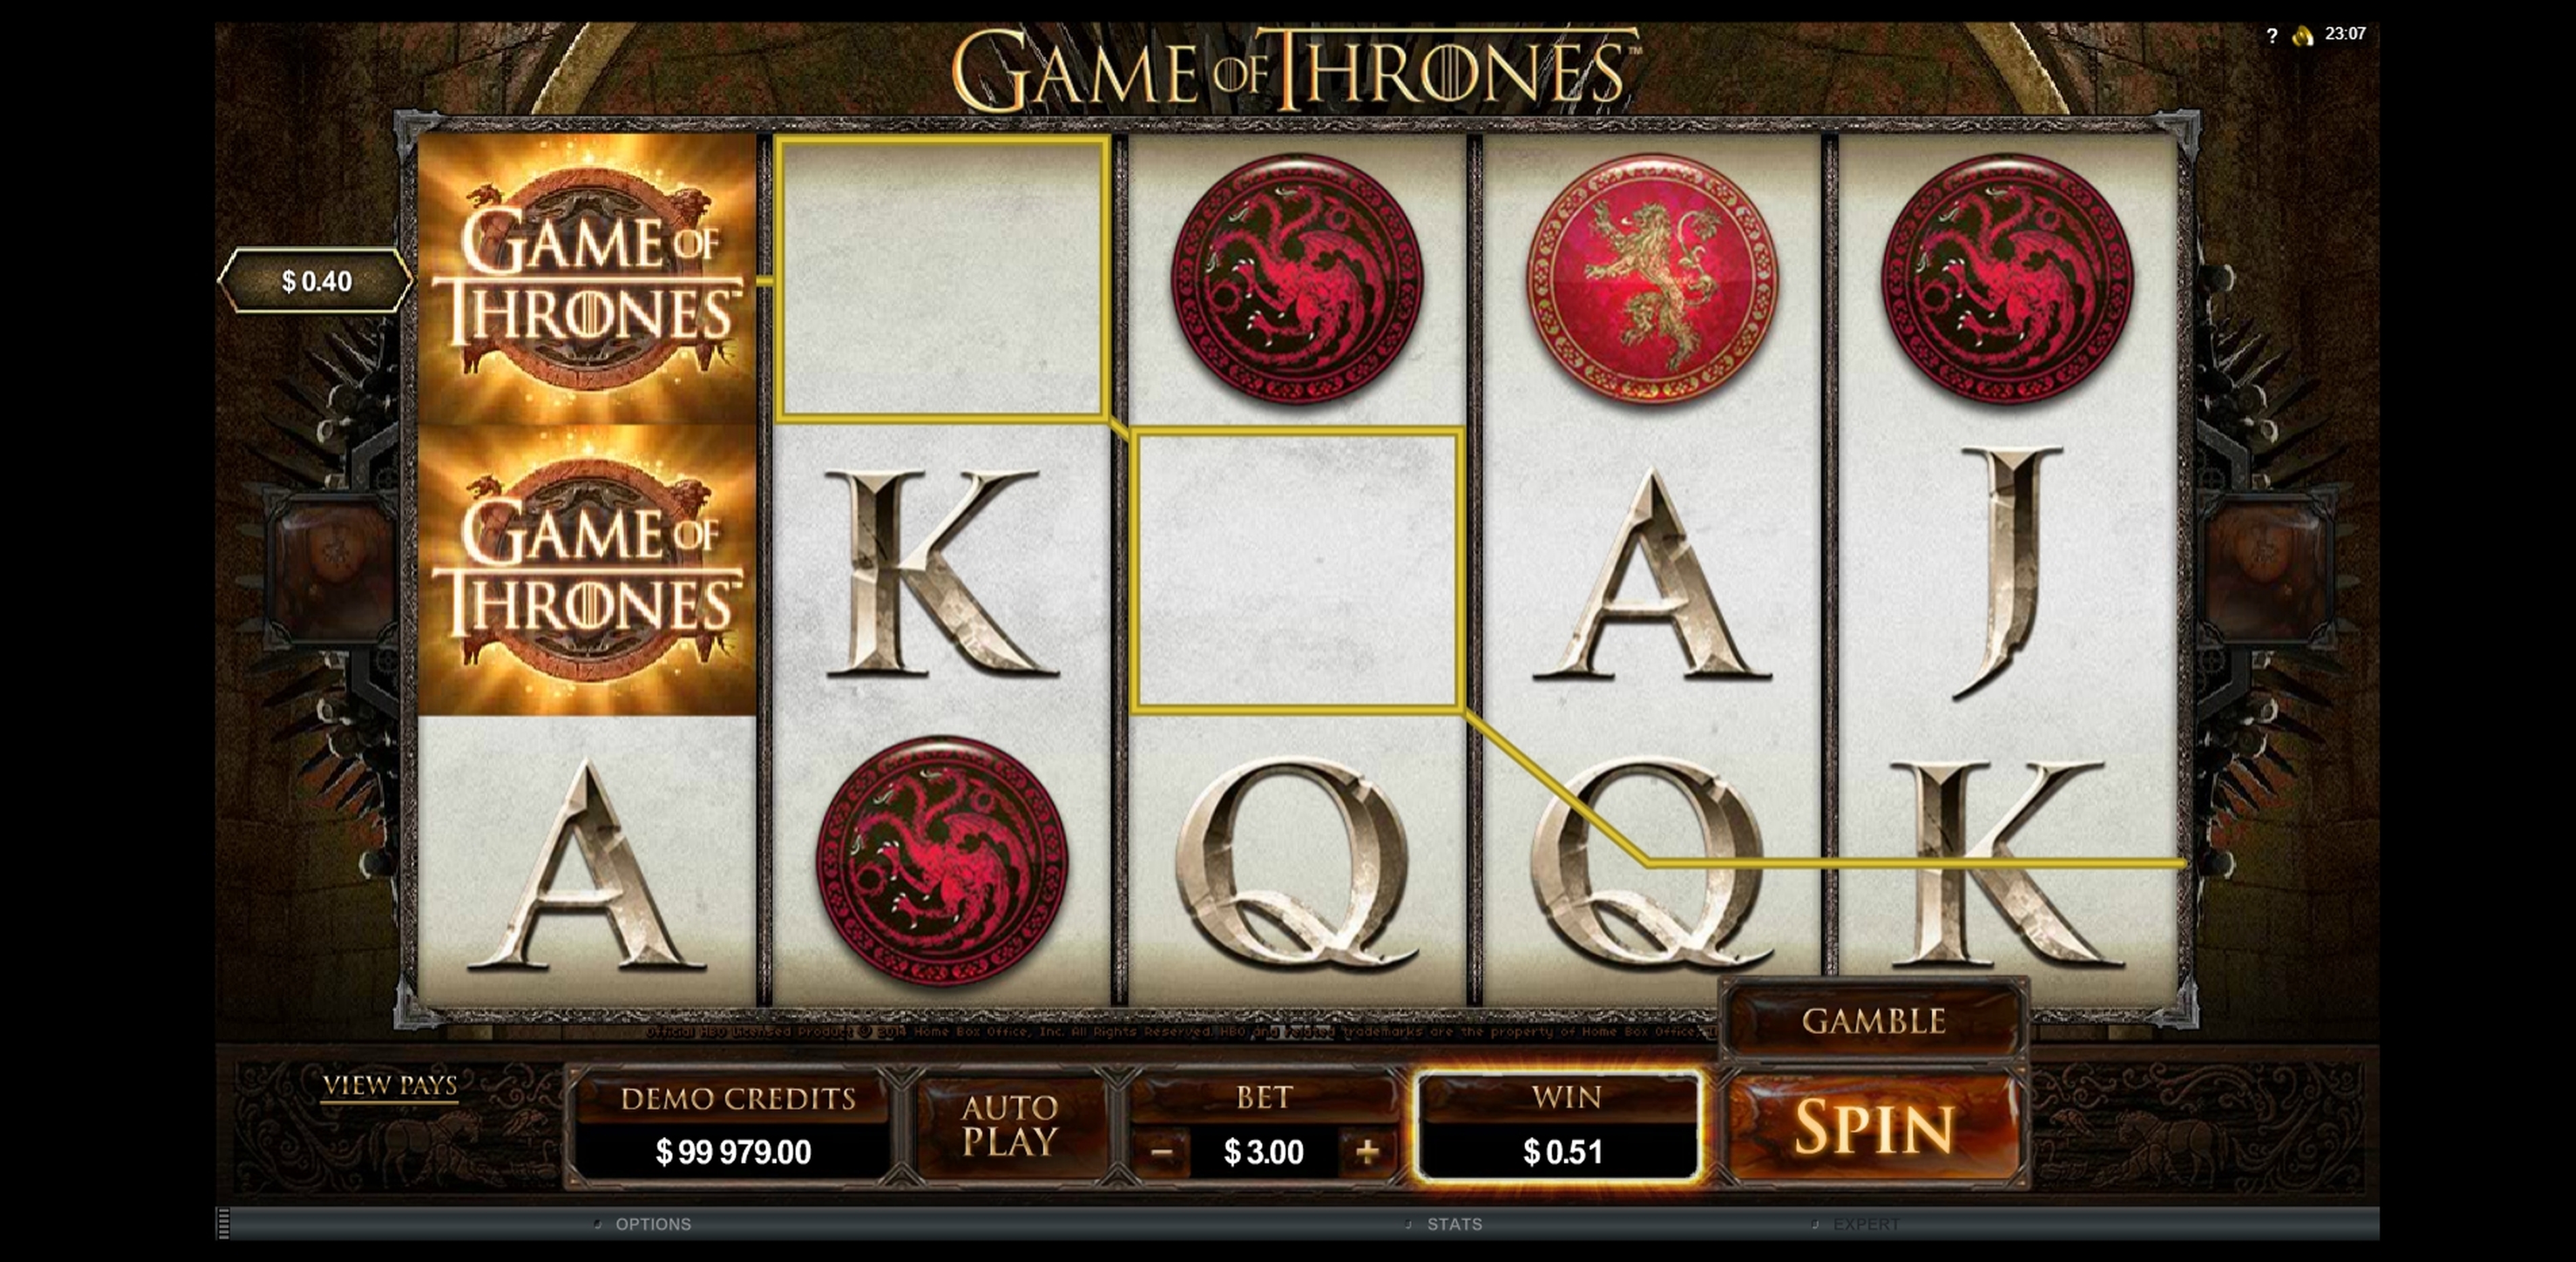 Win Money in Game of Thrones 15 lines Free Slot Game by Microgaming